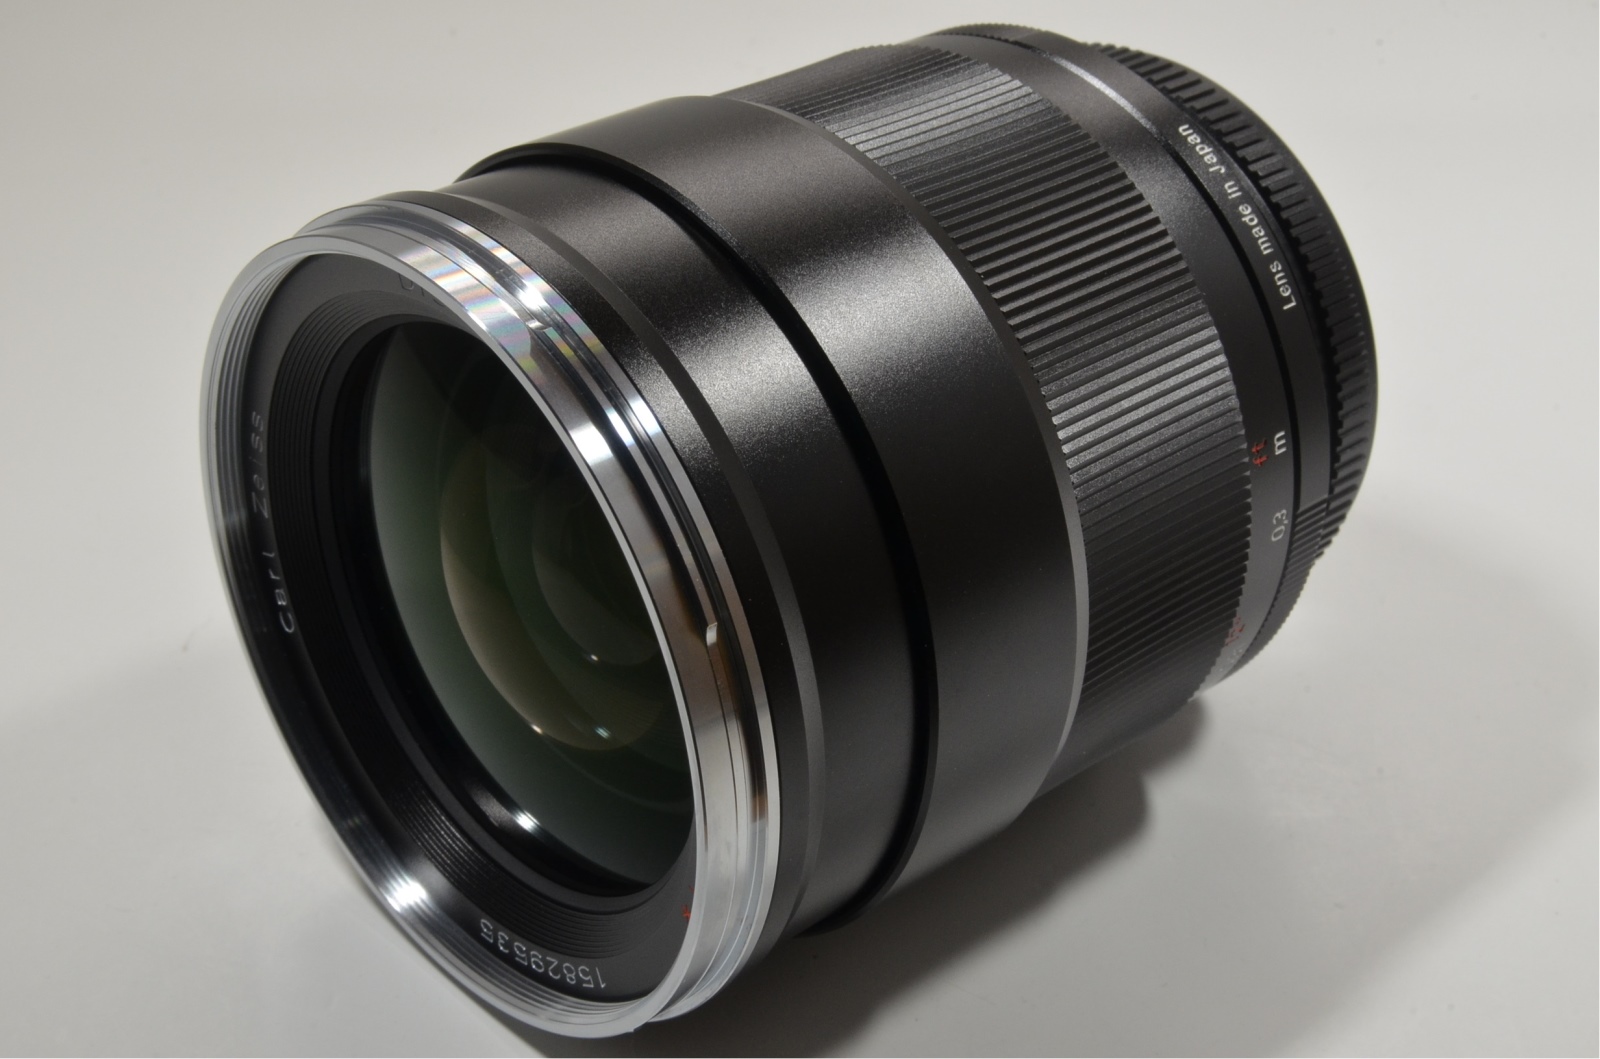 carl zeiss distagon t* 35mm f1.4 zf.2 for nikon with lens filter